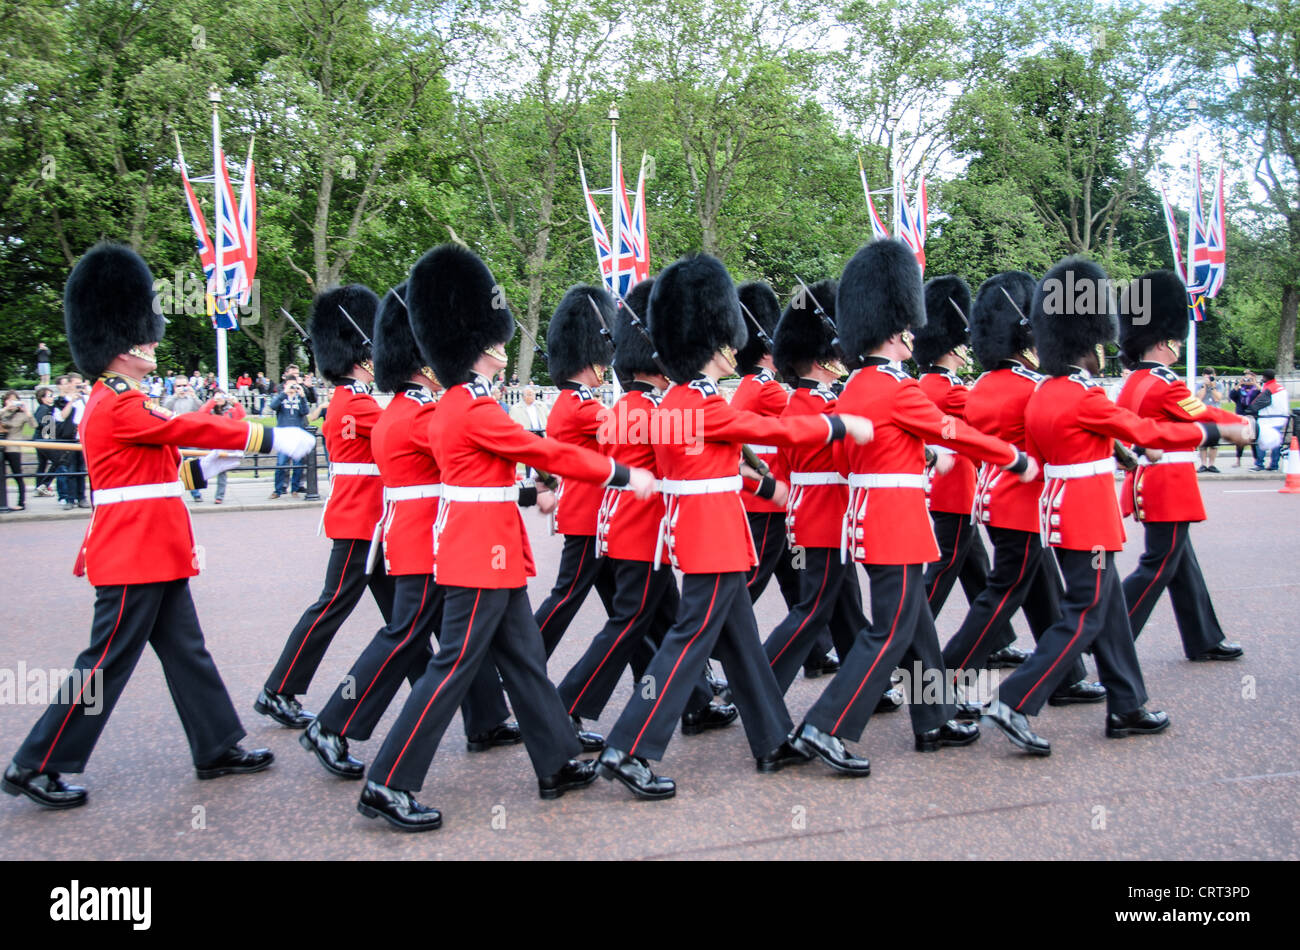 LONDON, United Kingdom — Grenadier Guards participate in a ceremonial parade at Buckingham Palace. This elite regiment of the British Army is known for their iconic uniform and precision in drill, representing the United Kingdom's rich military heritage. Stock Photo